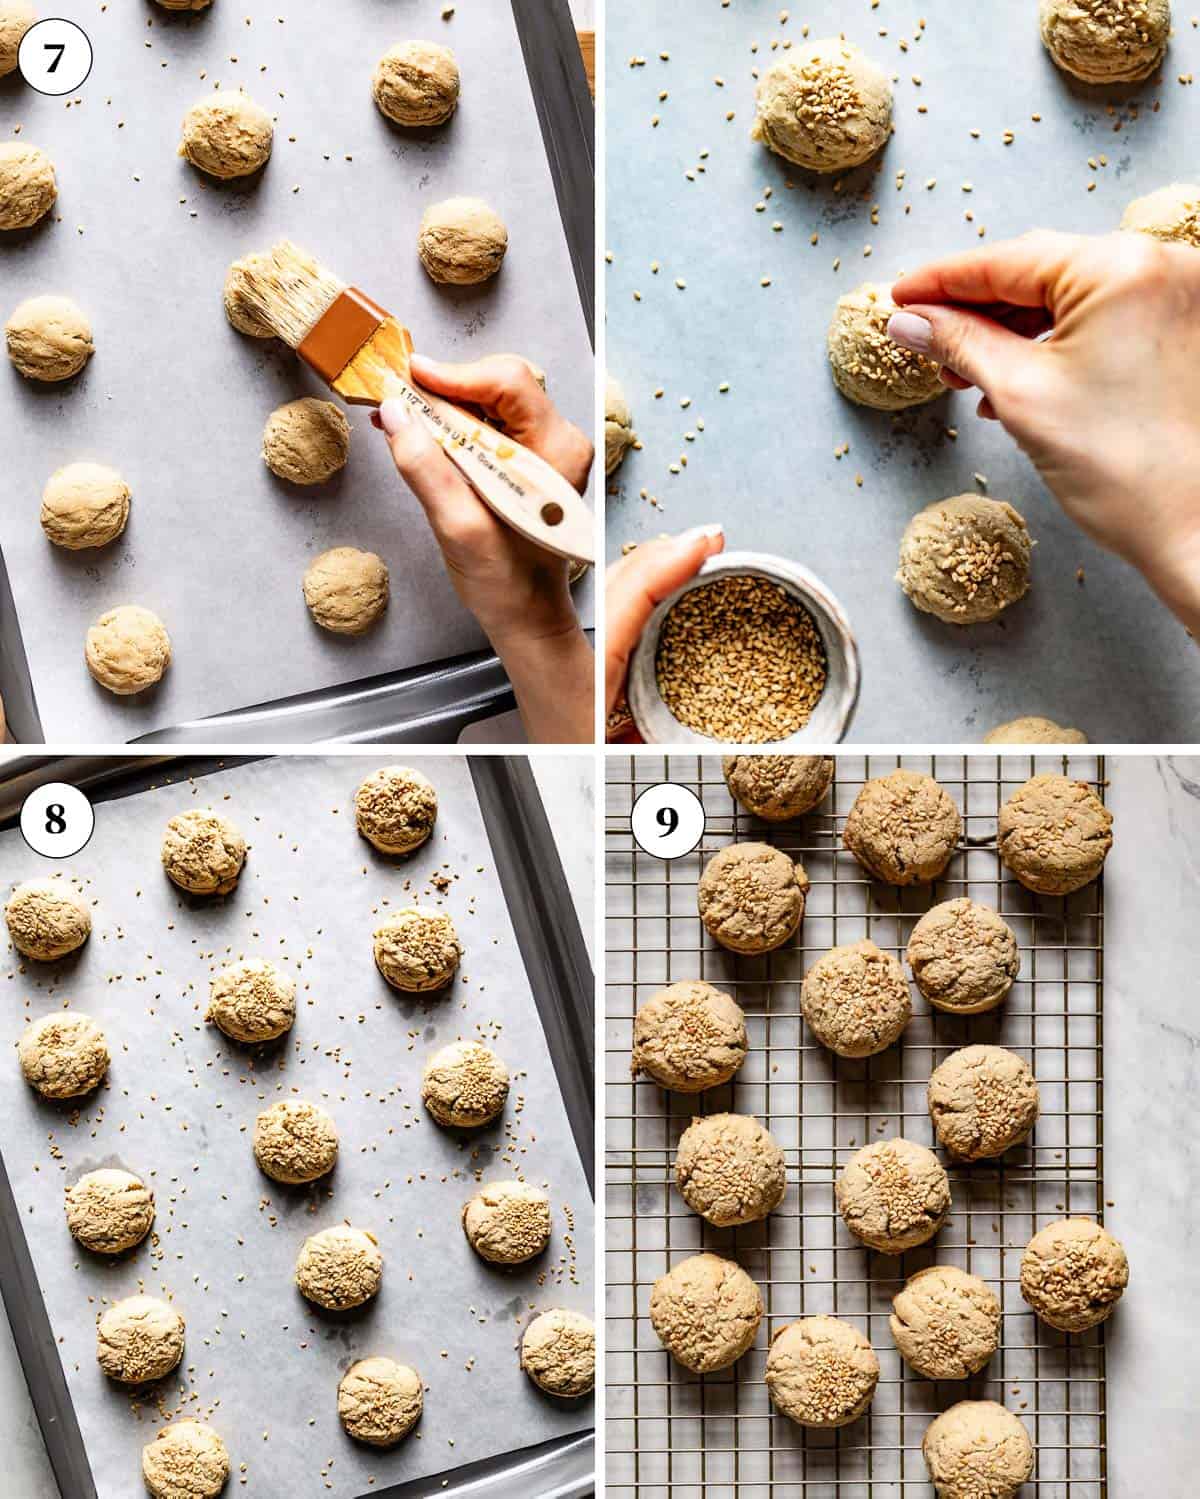 A collage of images showing tahini almond flour cookies on a sheet pan before and after they are baked.